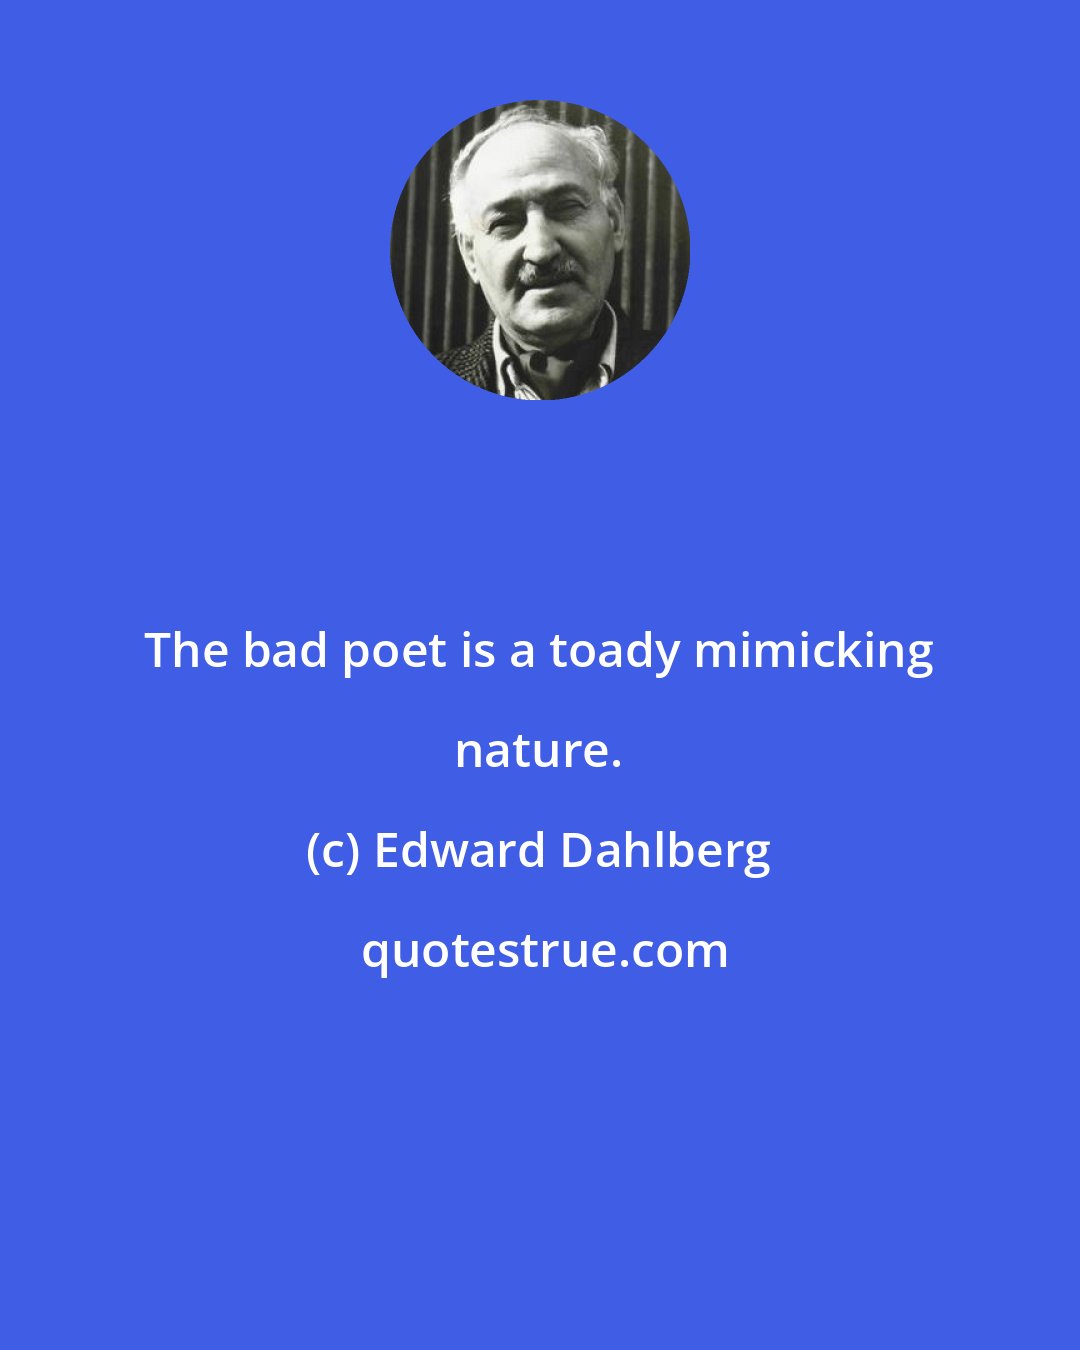 Edward Dahlberg: The bad poet is a toady mimicking nature.